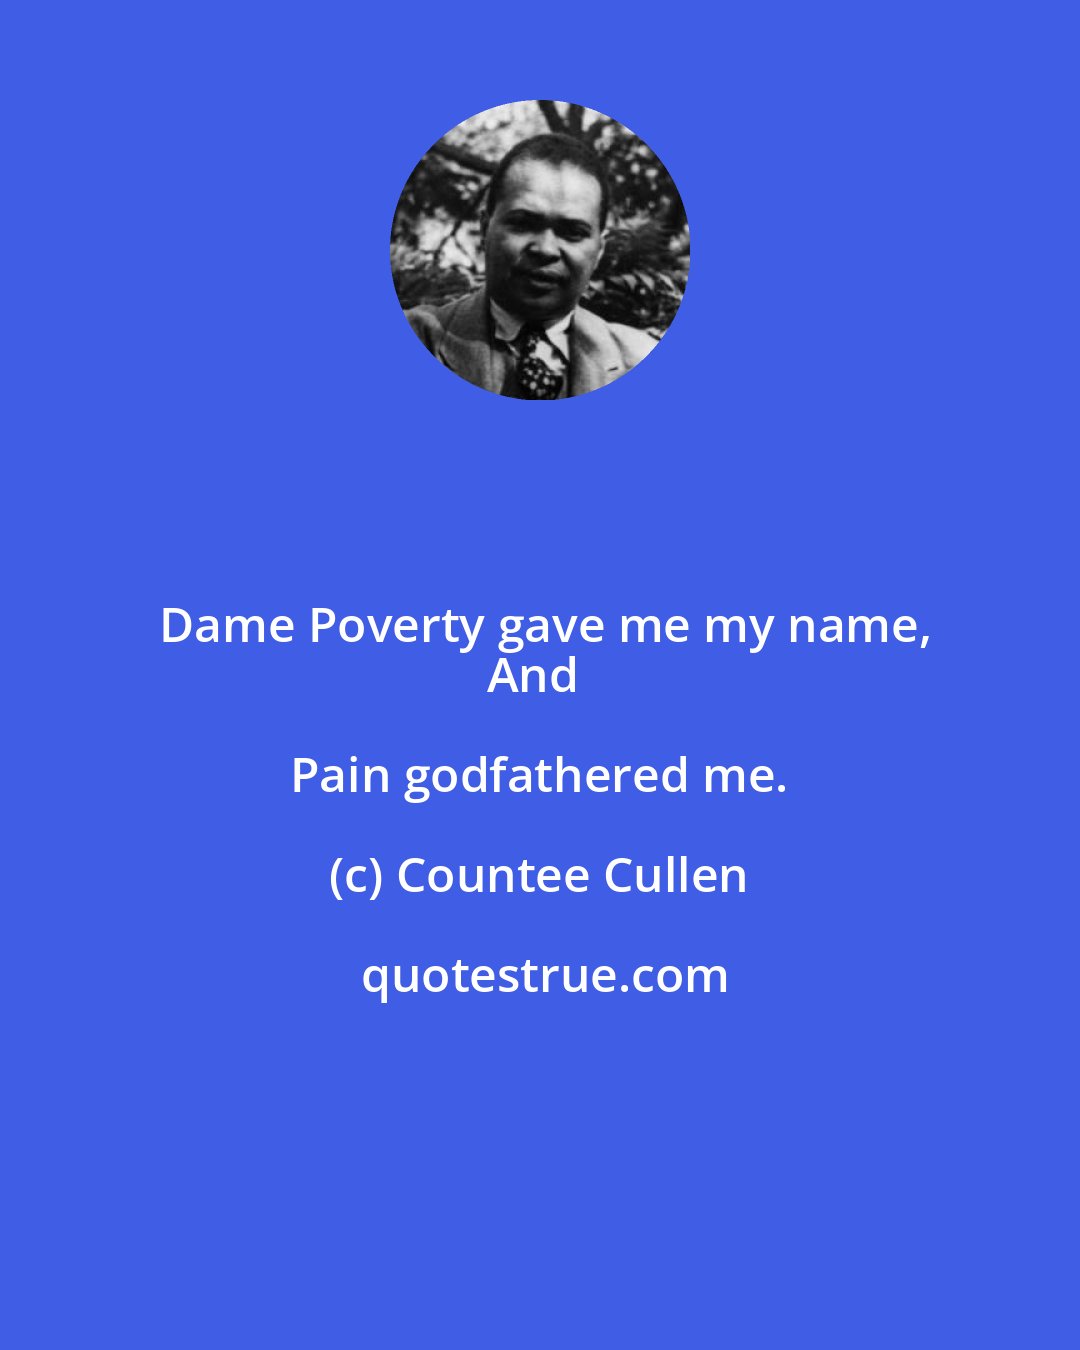 Countee Cullen: Dame Poverty gave me my name,
And Pain godfathered me.